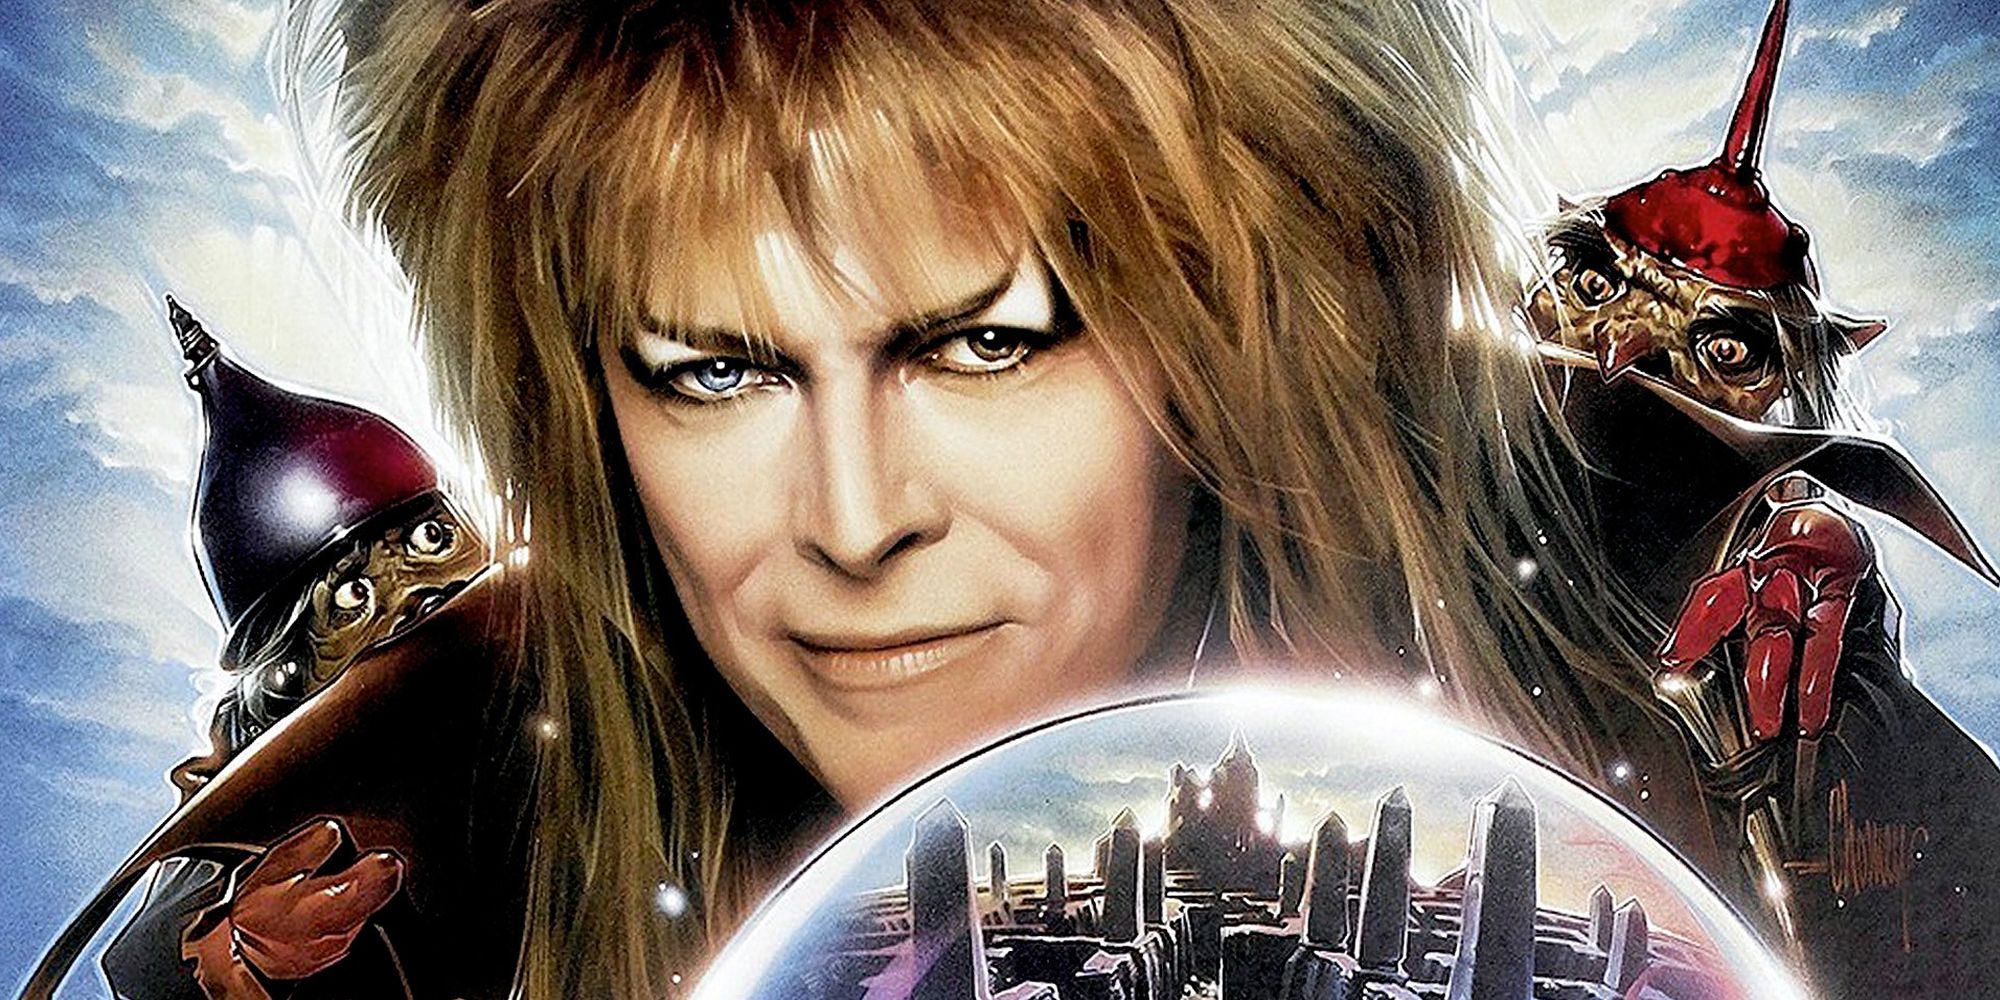 Jareth poses on the poster for Labyrinth.